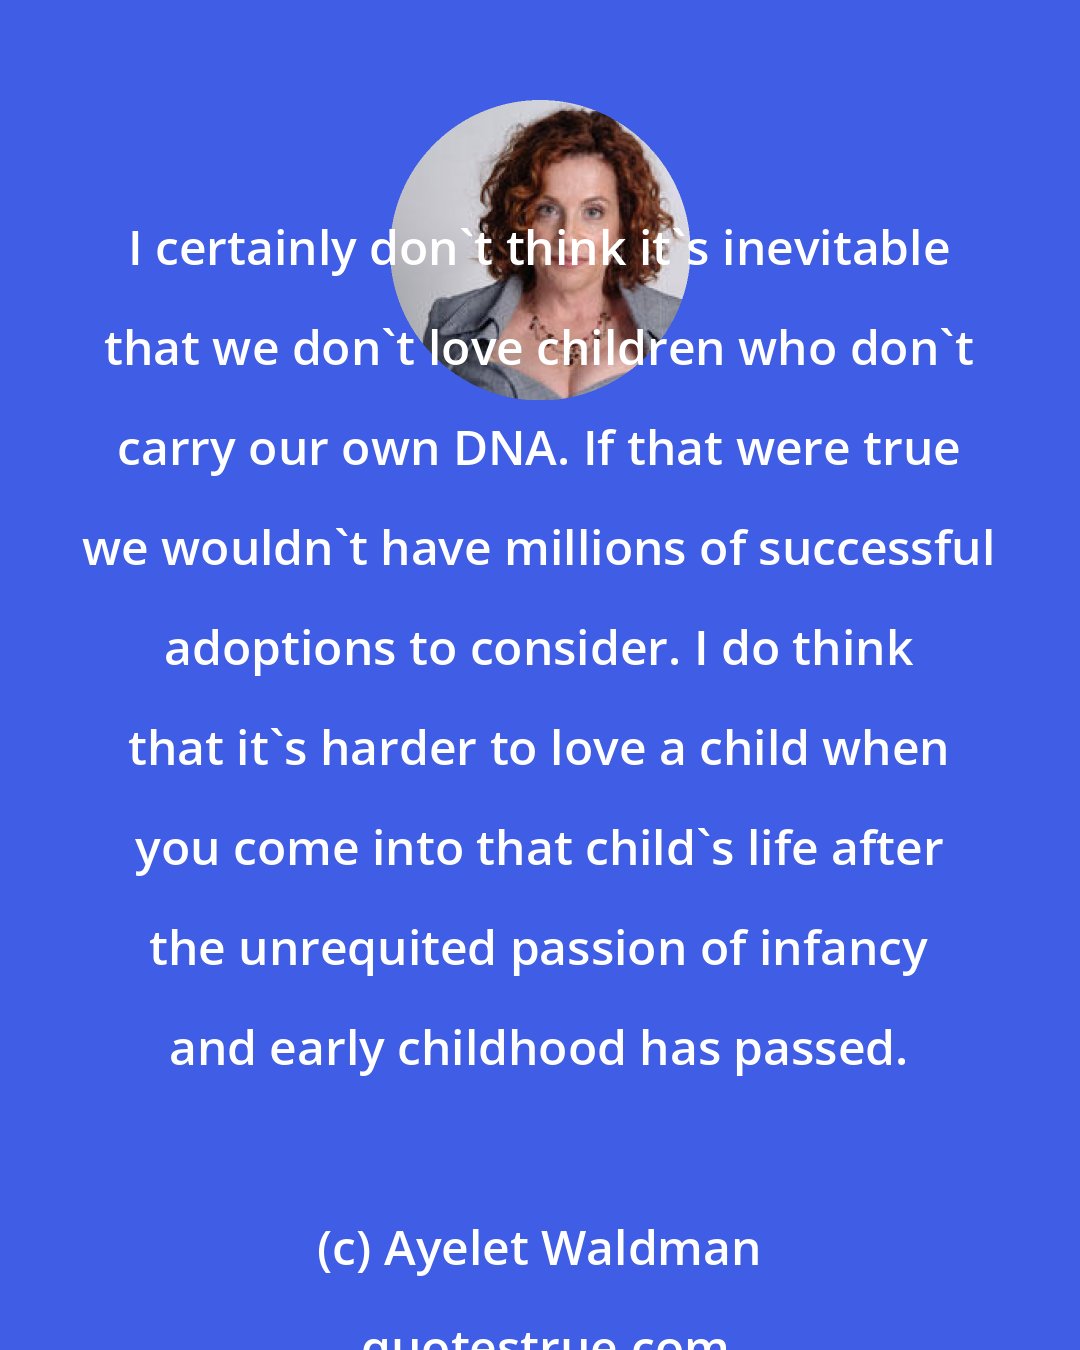 Ayelet Waldman: I certainly don't think it's inevitable that we don't love children who don't carry our own DNA. If that were true we wouldn't have millions of successful adoptions to consider. I do think that it's harder to love a child when you come into that child's life after the unrequited passion of infancy and early childhood has passed.